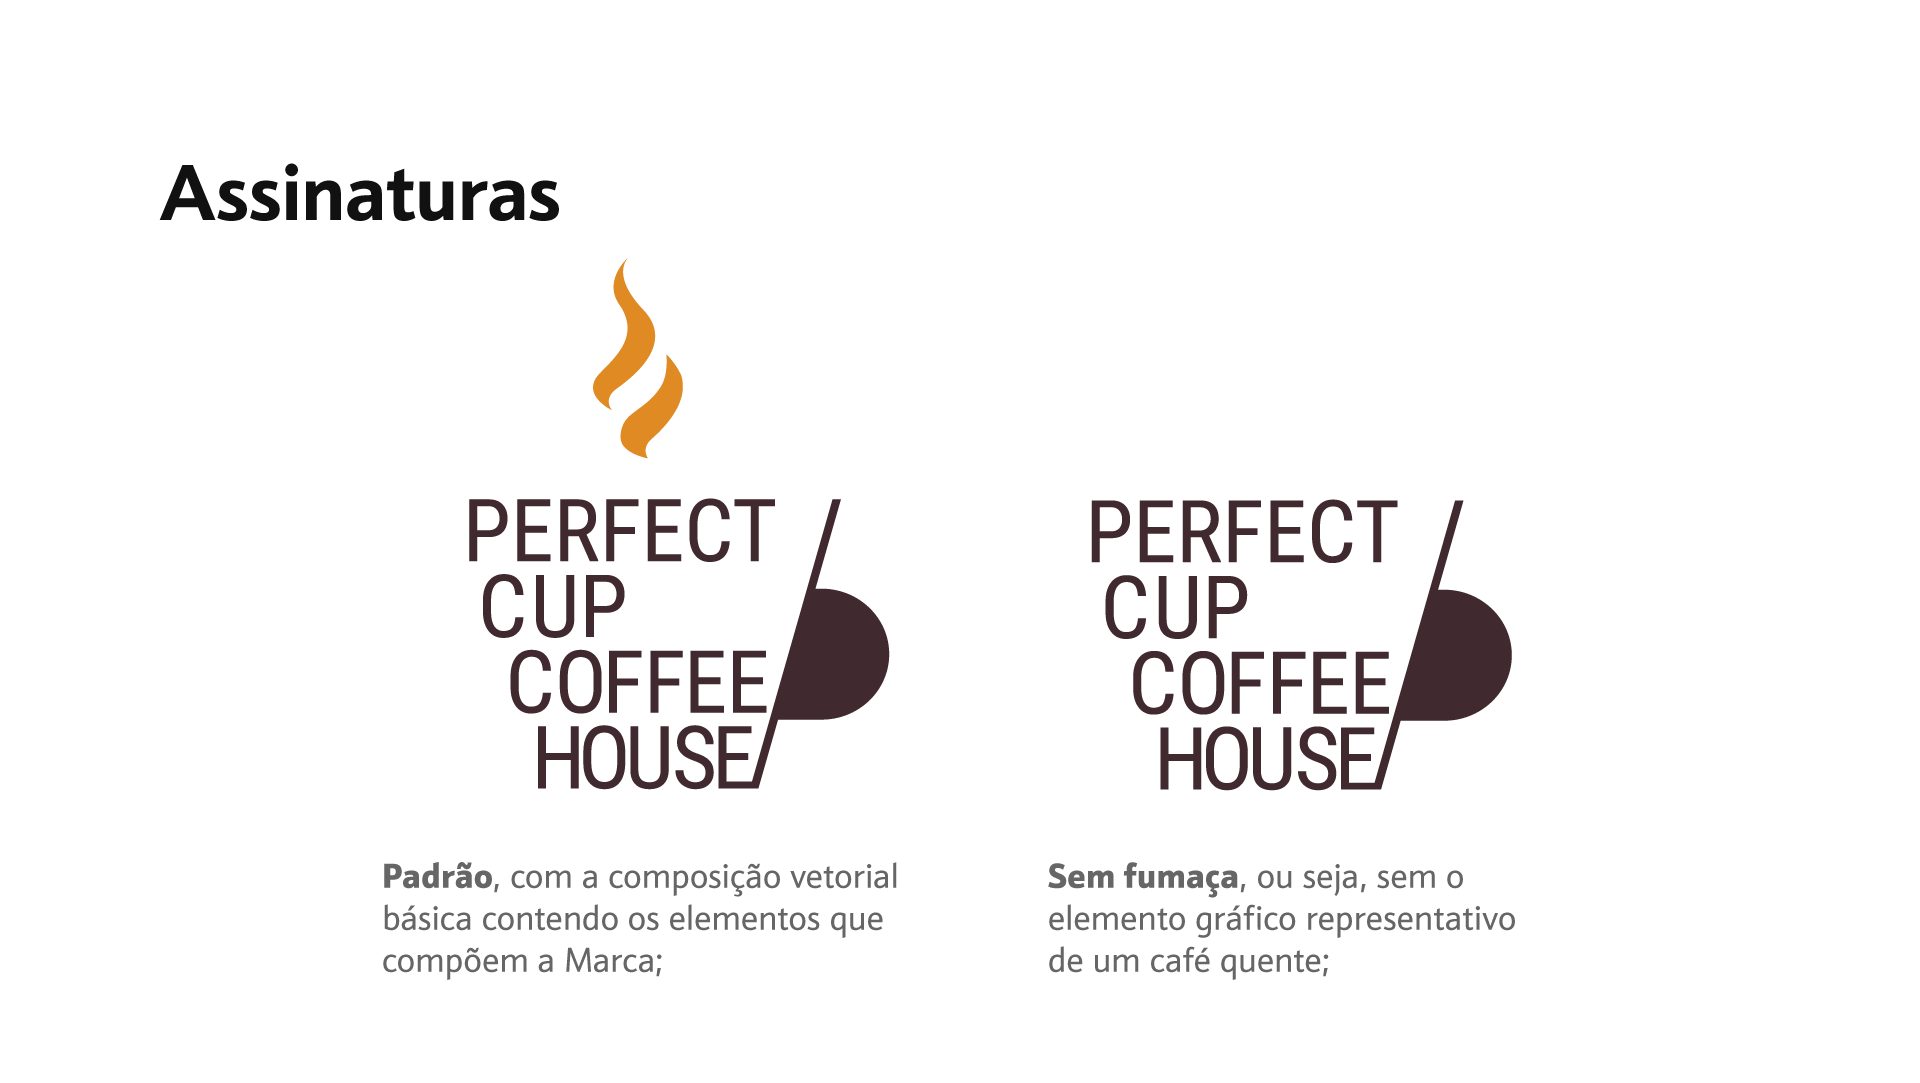 Case Perfect Cup Coffee House | EnterDesign